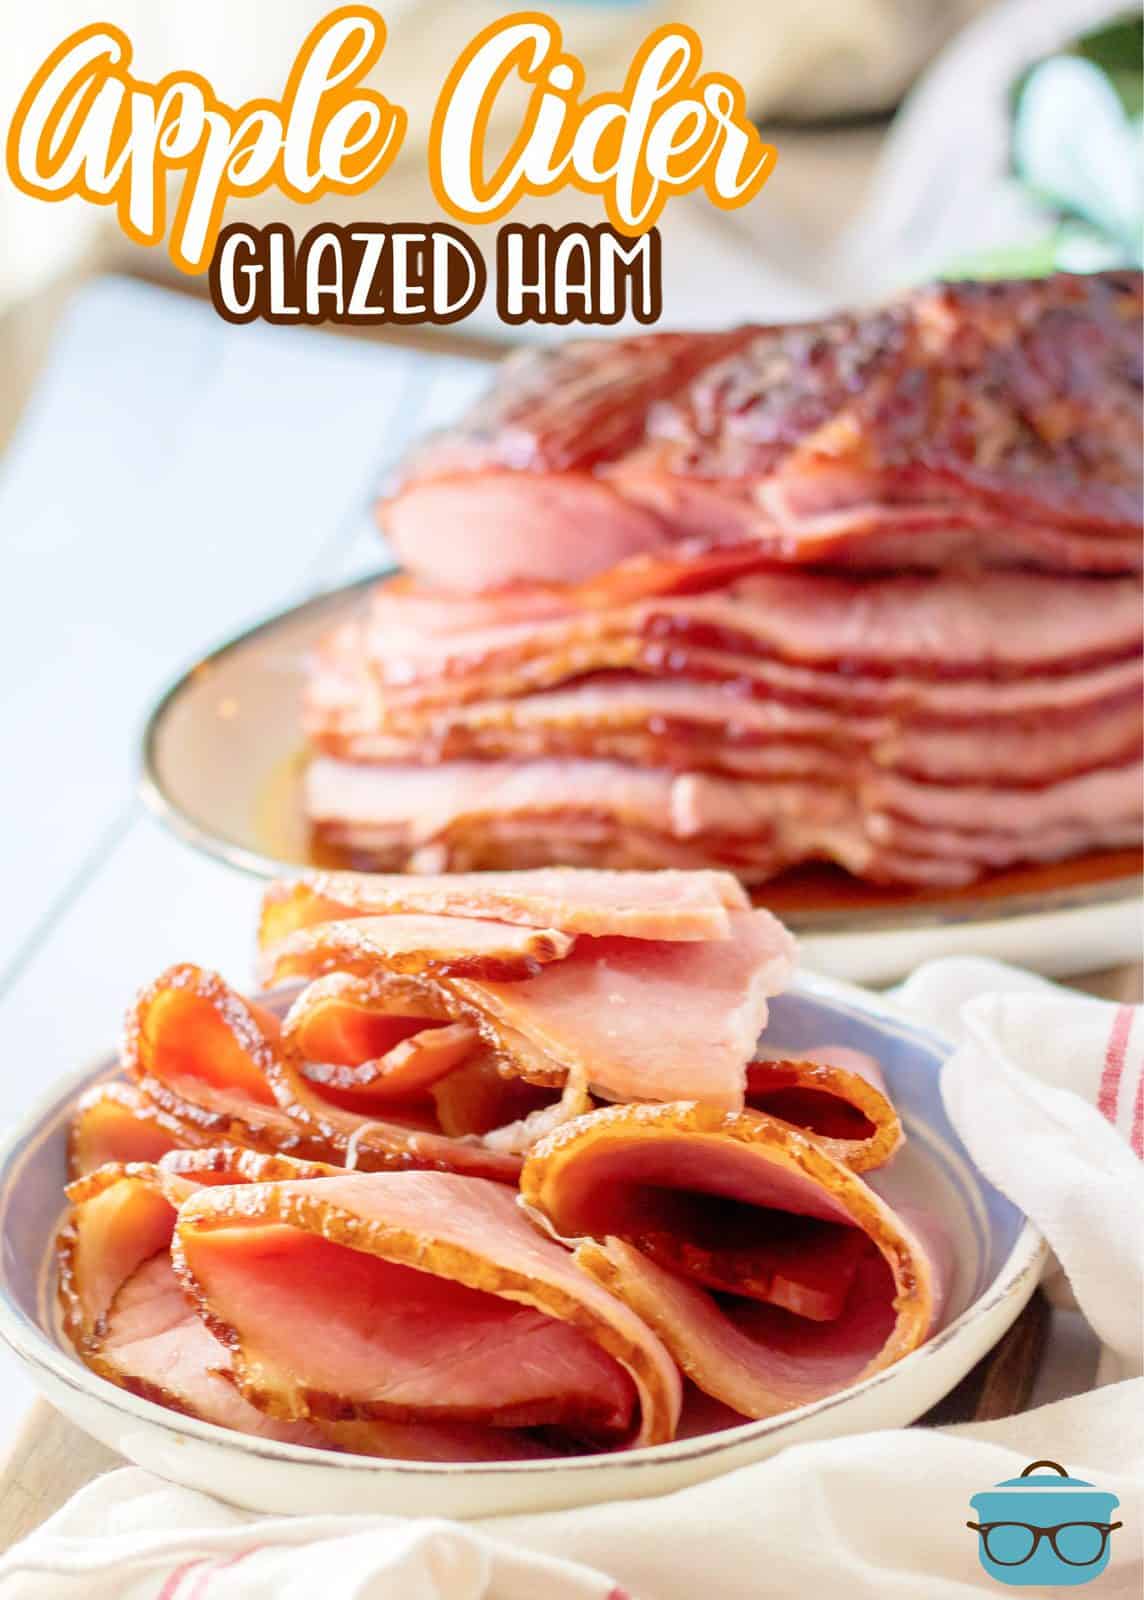 Pinterest image with sliced Apple Cider Glazed Ham on plate with whole ham in background on platter.